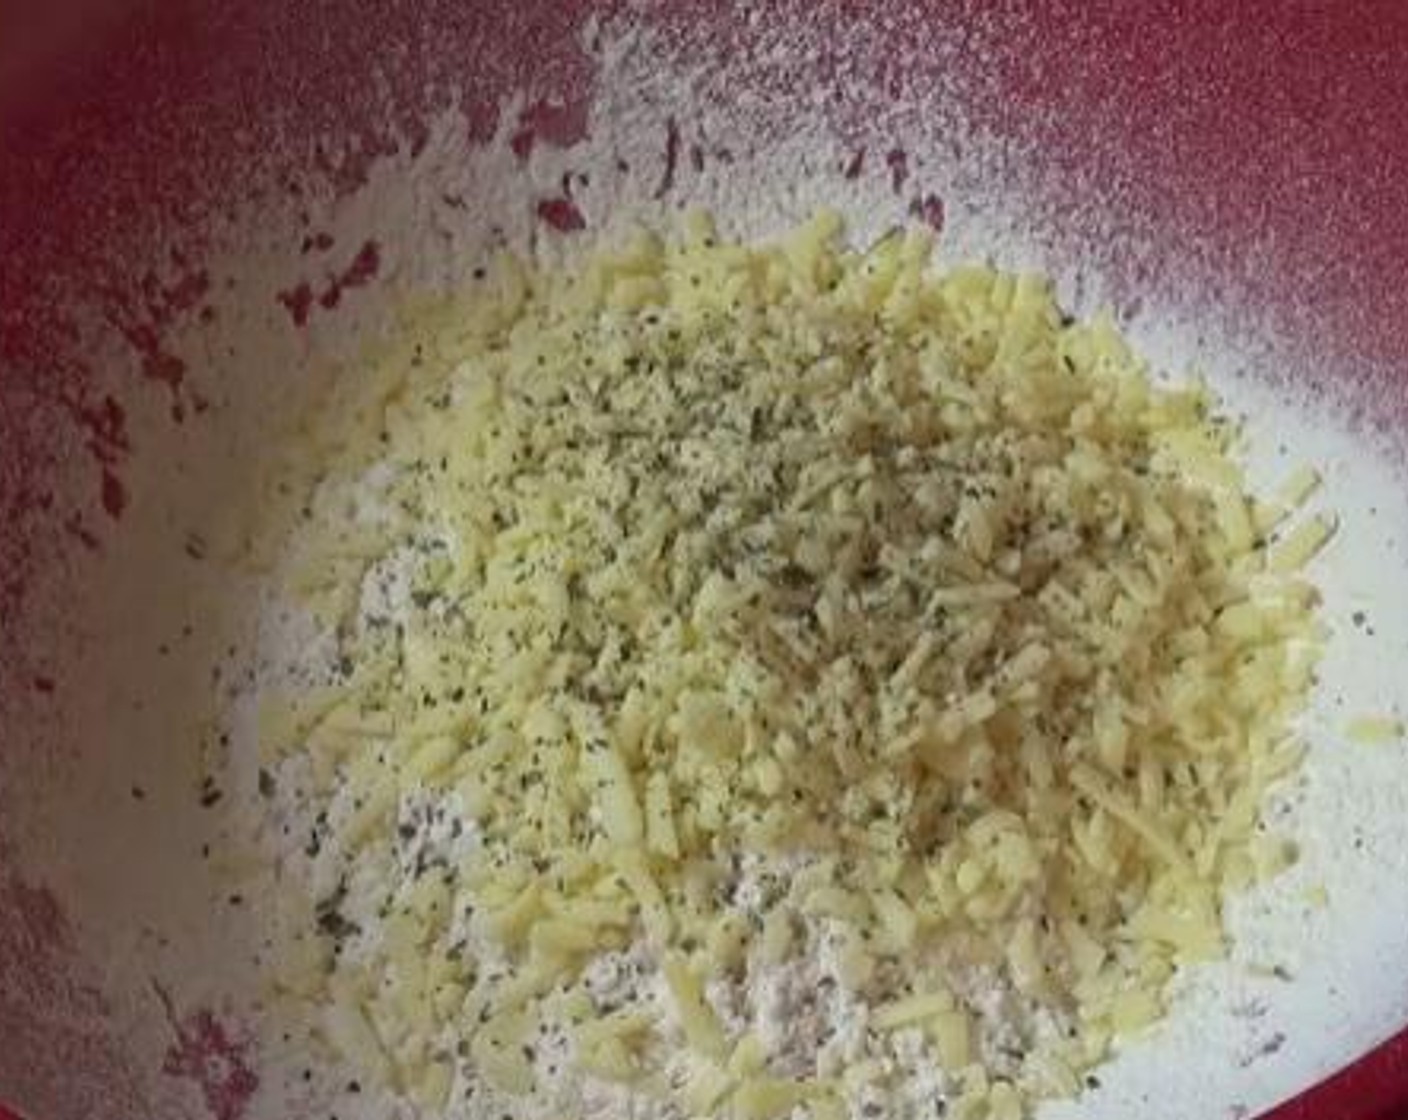 step 2 Add the All-Purpose Flour (2 cups), Salt (1 pinch),Baking Powder (1/2 Tbsp), Cheese (1/2 cup), and Dried Mixed Herbs (1 Tbsp) into a big bowl. Using a spoon, mix everything together.